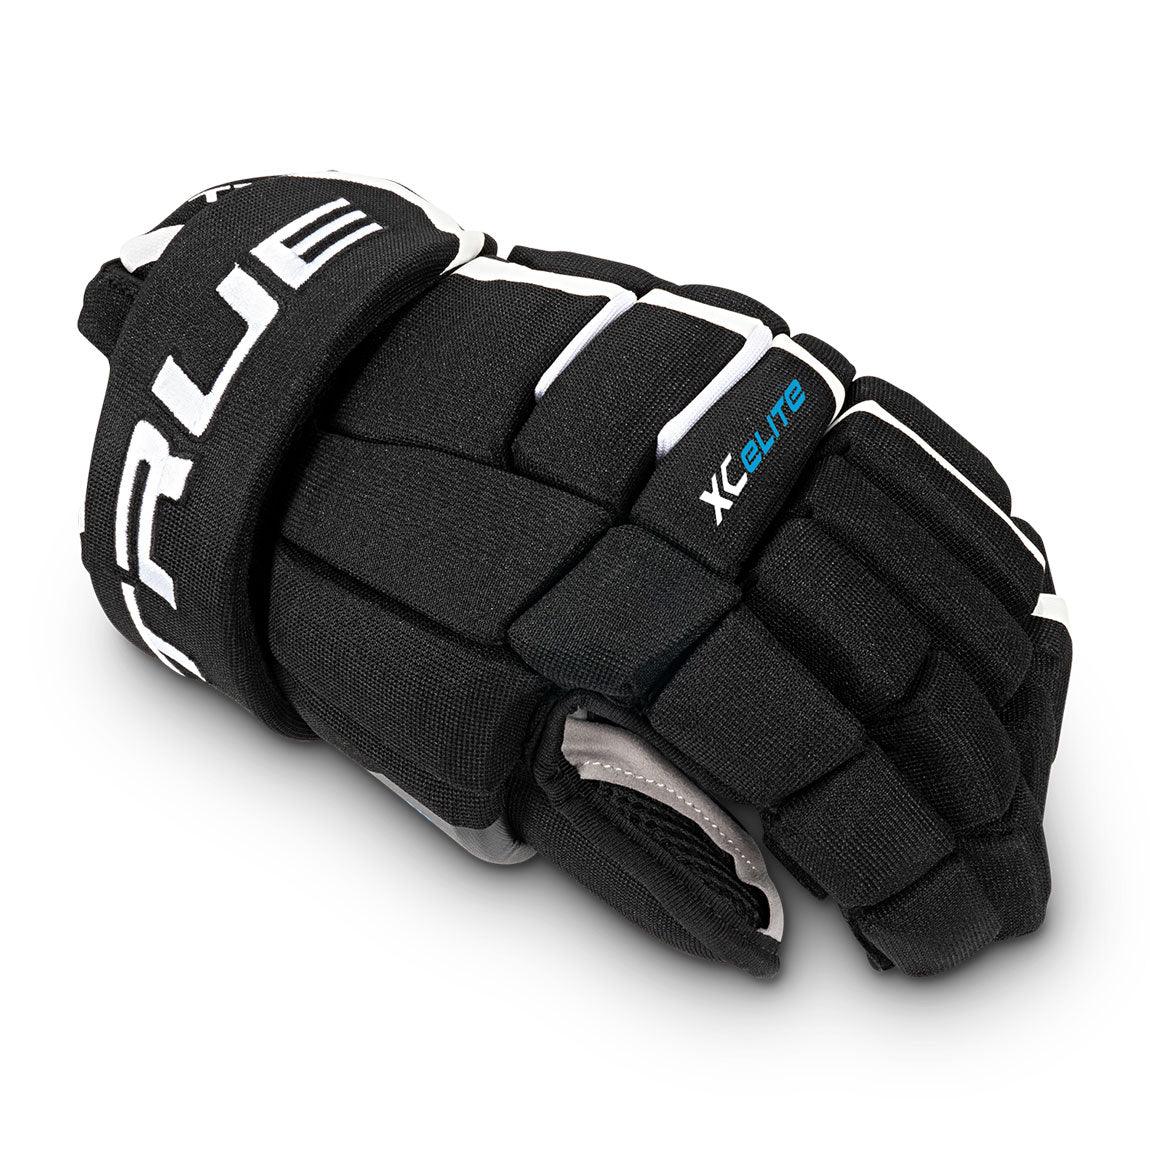 XC Elite 2020 Tapered Fit Glove - Senior - Sports Excellence